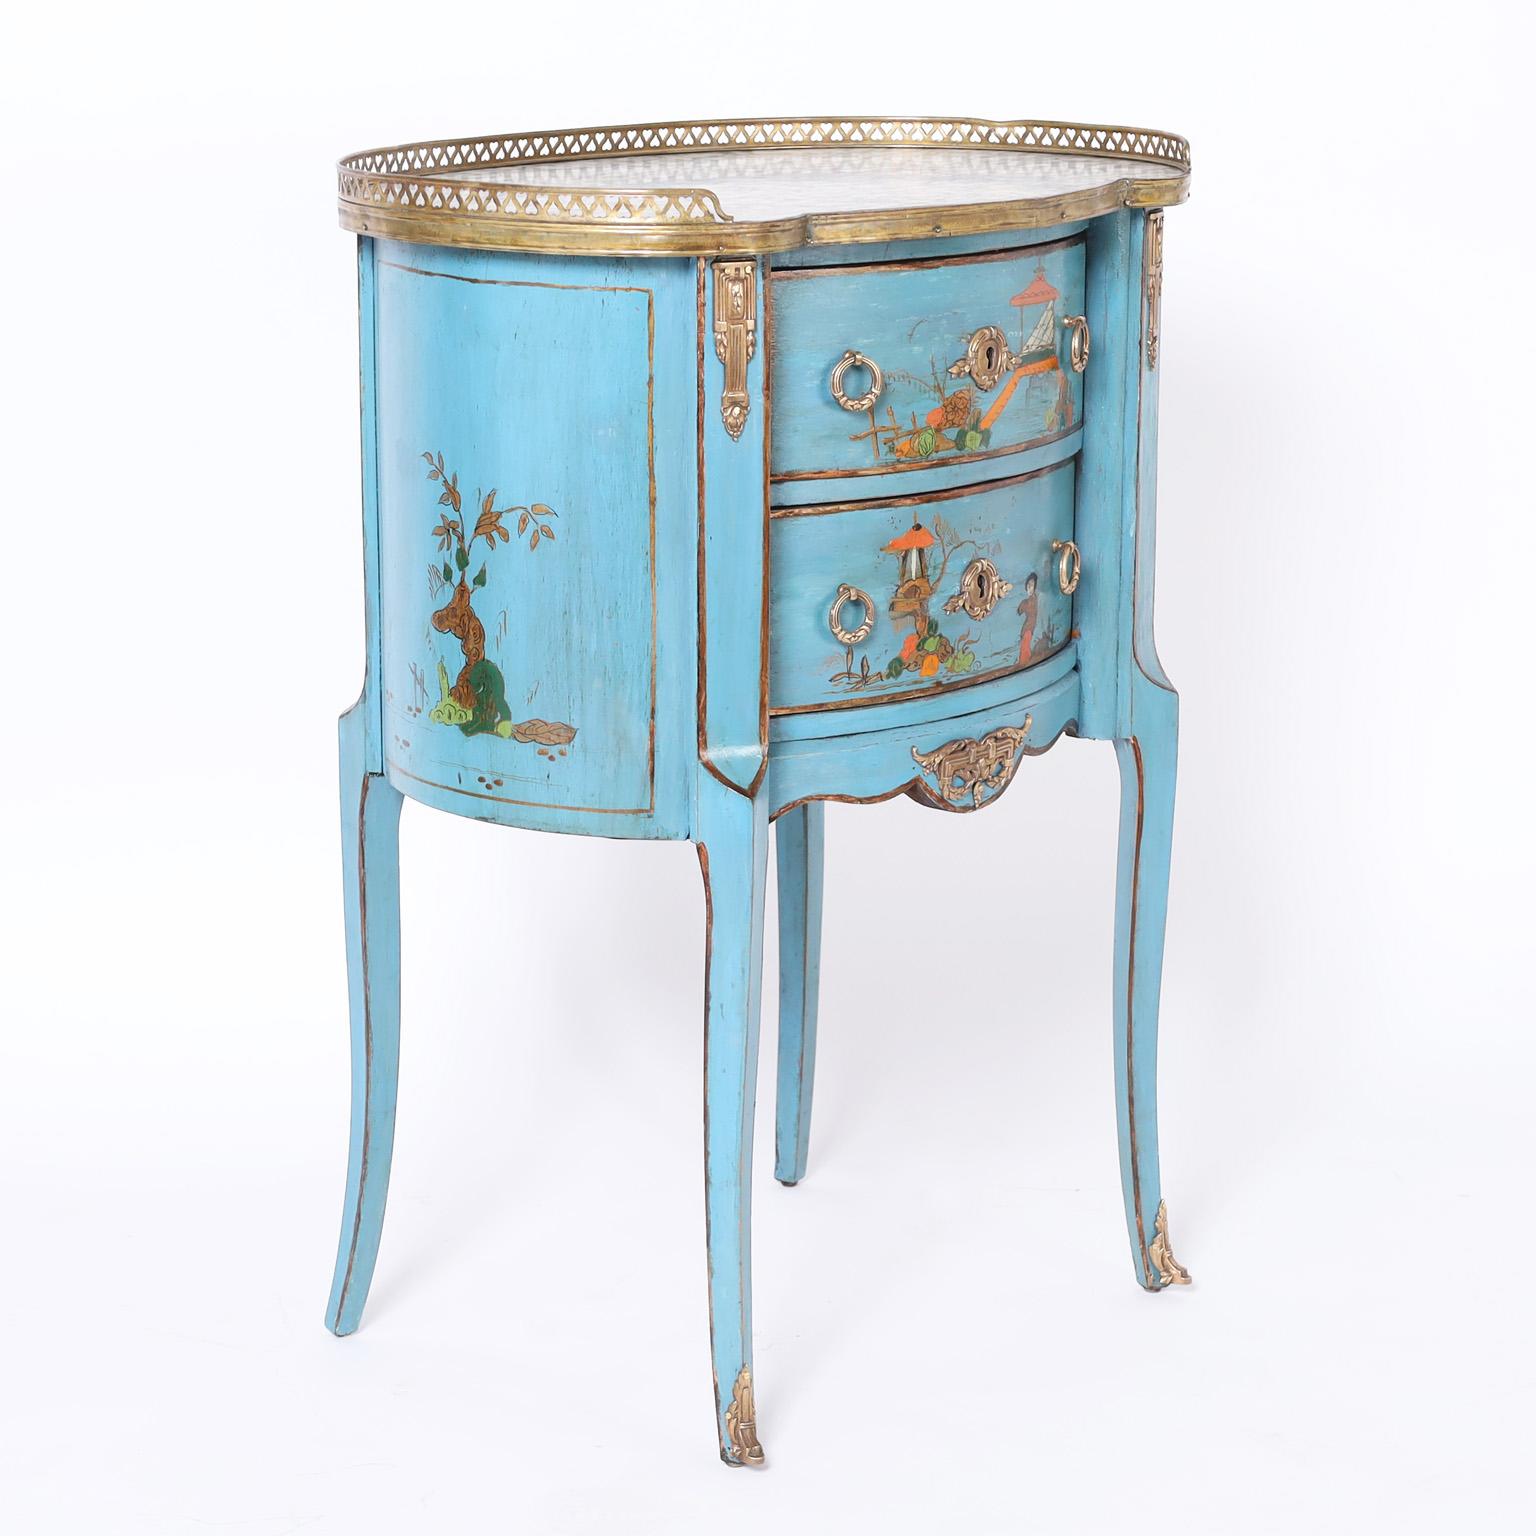 Standout French Louis XV style two drawer stand with a marble top surrounded by a brass gallery over a case with an alluring blue finish decorated with chinoiserie and brass ormolu.